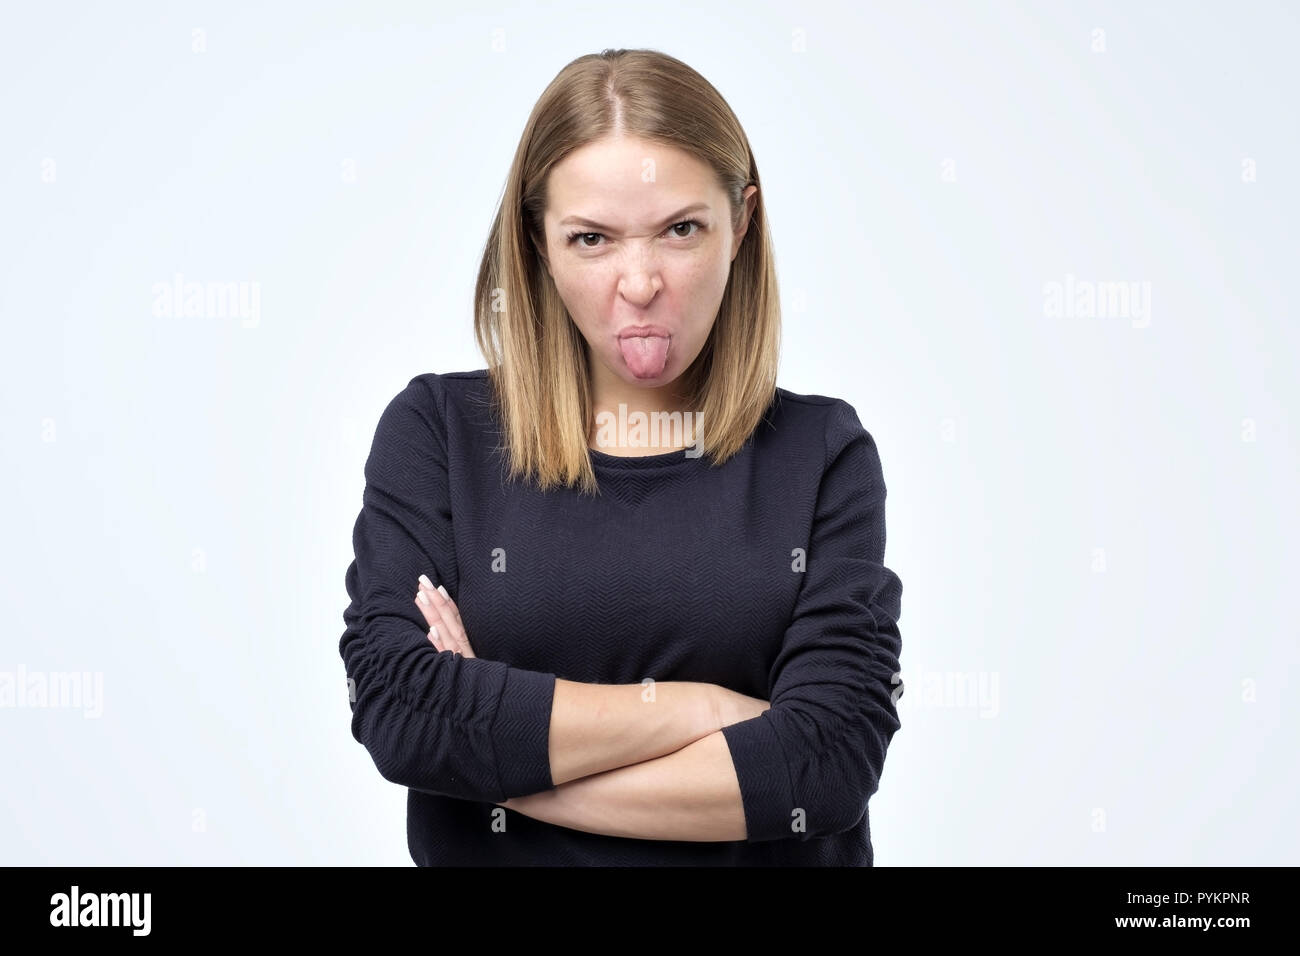 Dissatisfied woman frowns face, has disgusting expression, shows tongue, expresses disgust, irritated with somebody Stock Photo